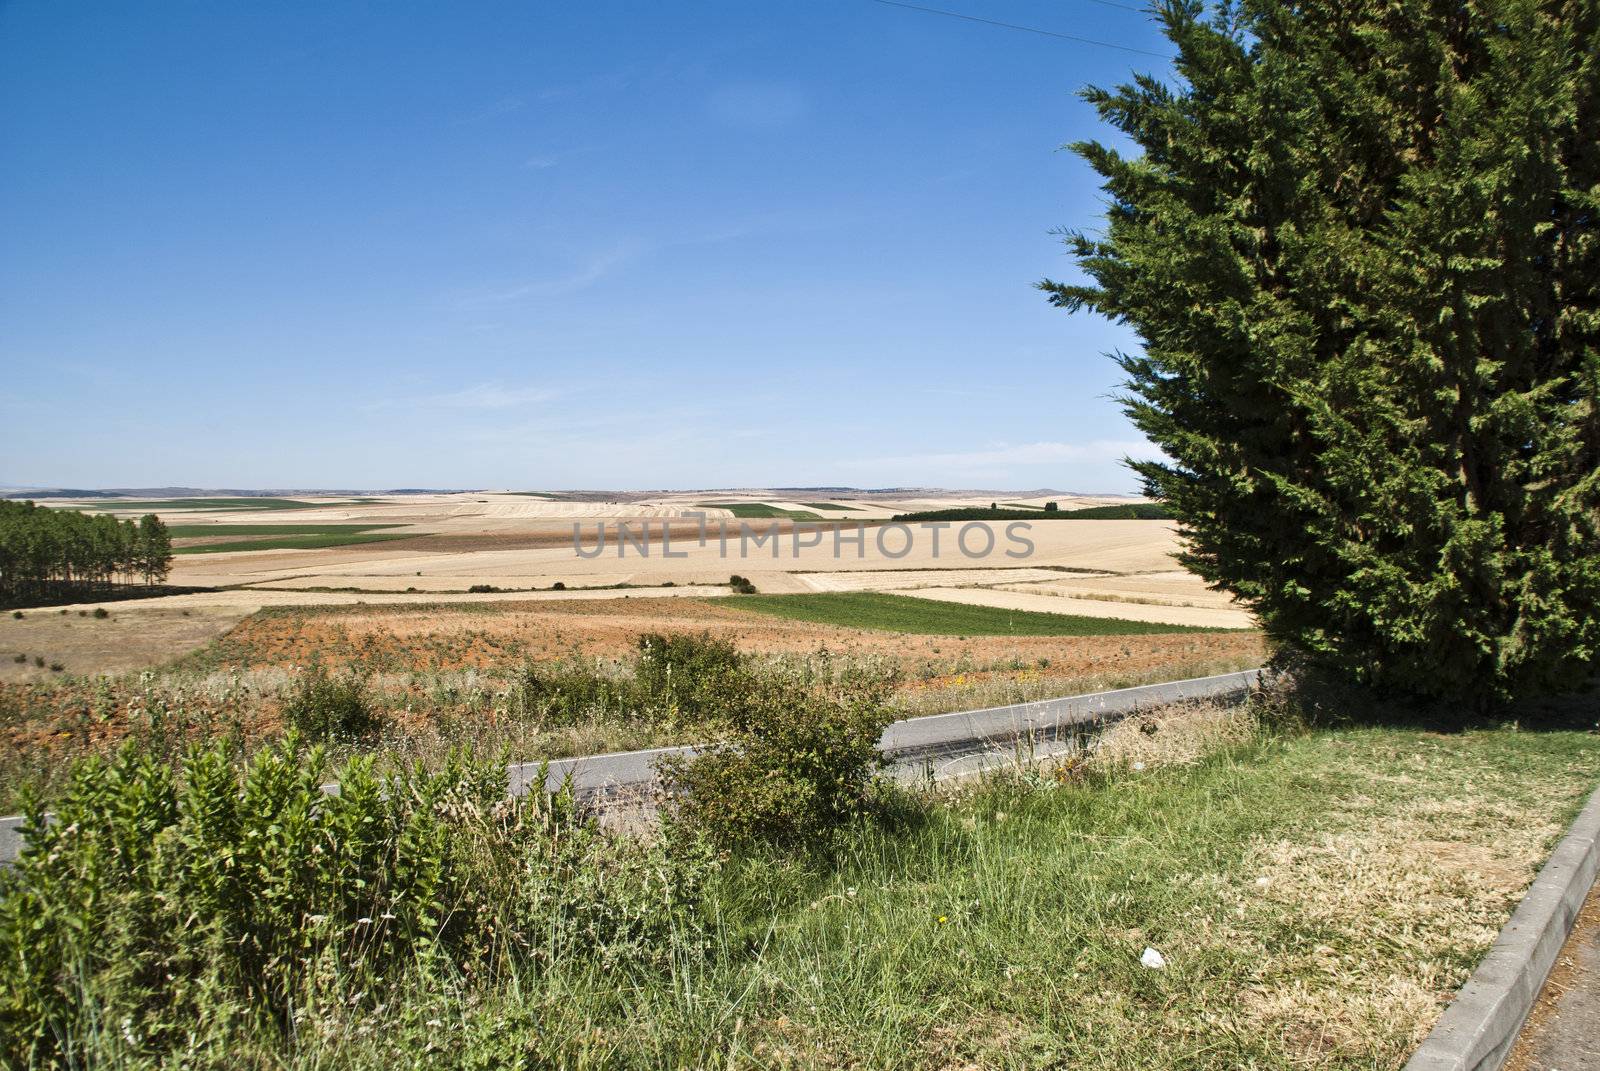 Agricultural Landscape in Spain. by steirus